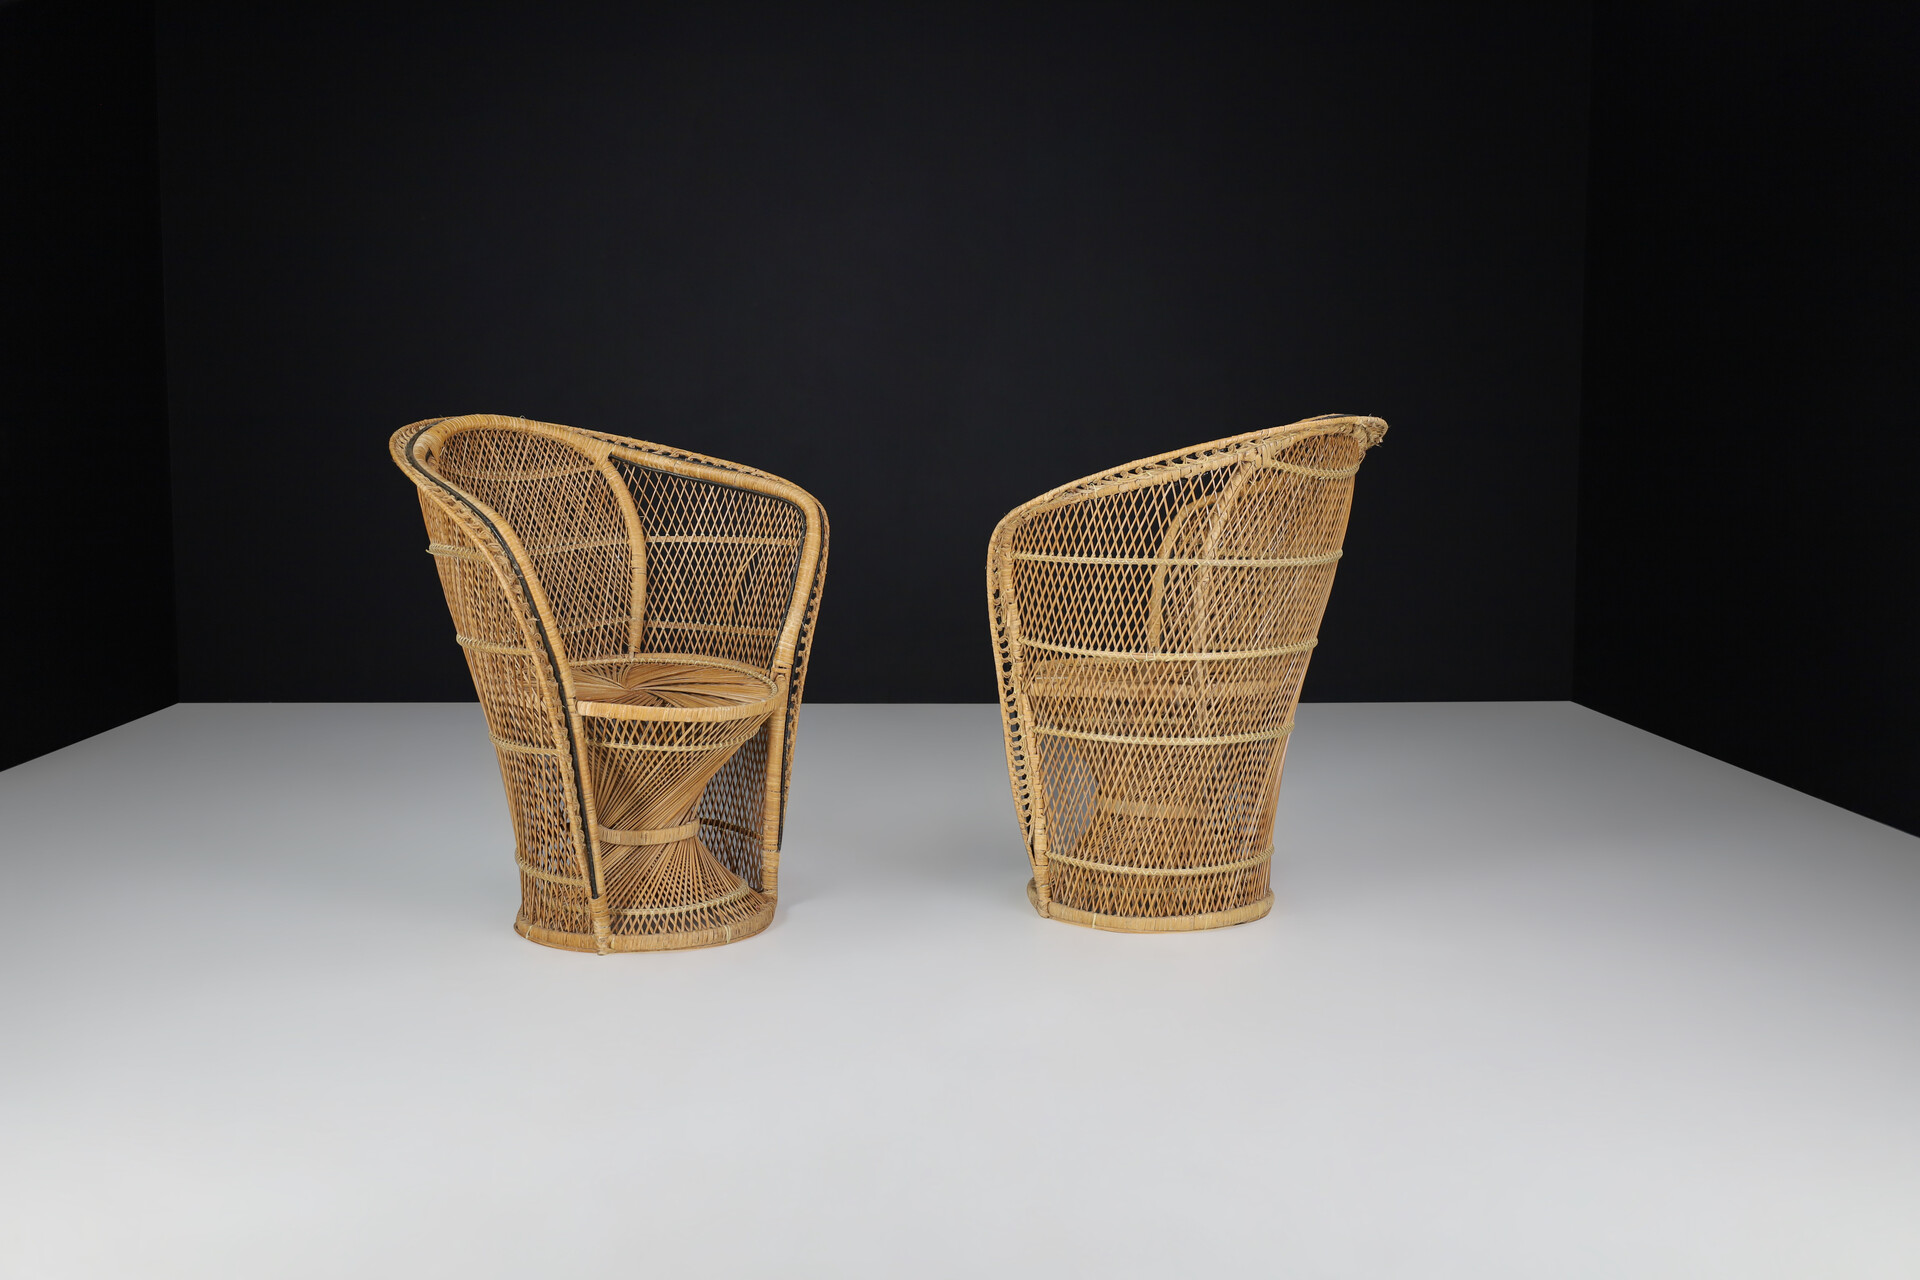 Bohemian Emmanuelle Wicker Peacock Chairs, France 1950s Mid-20th century